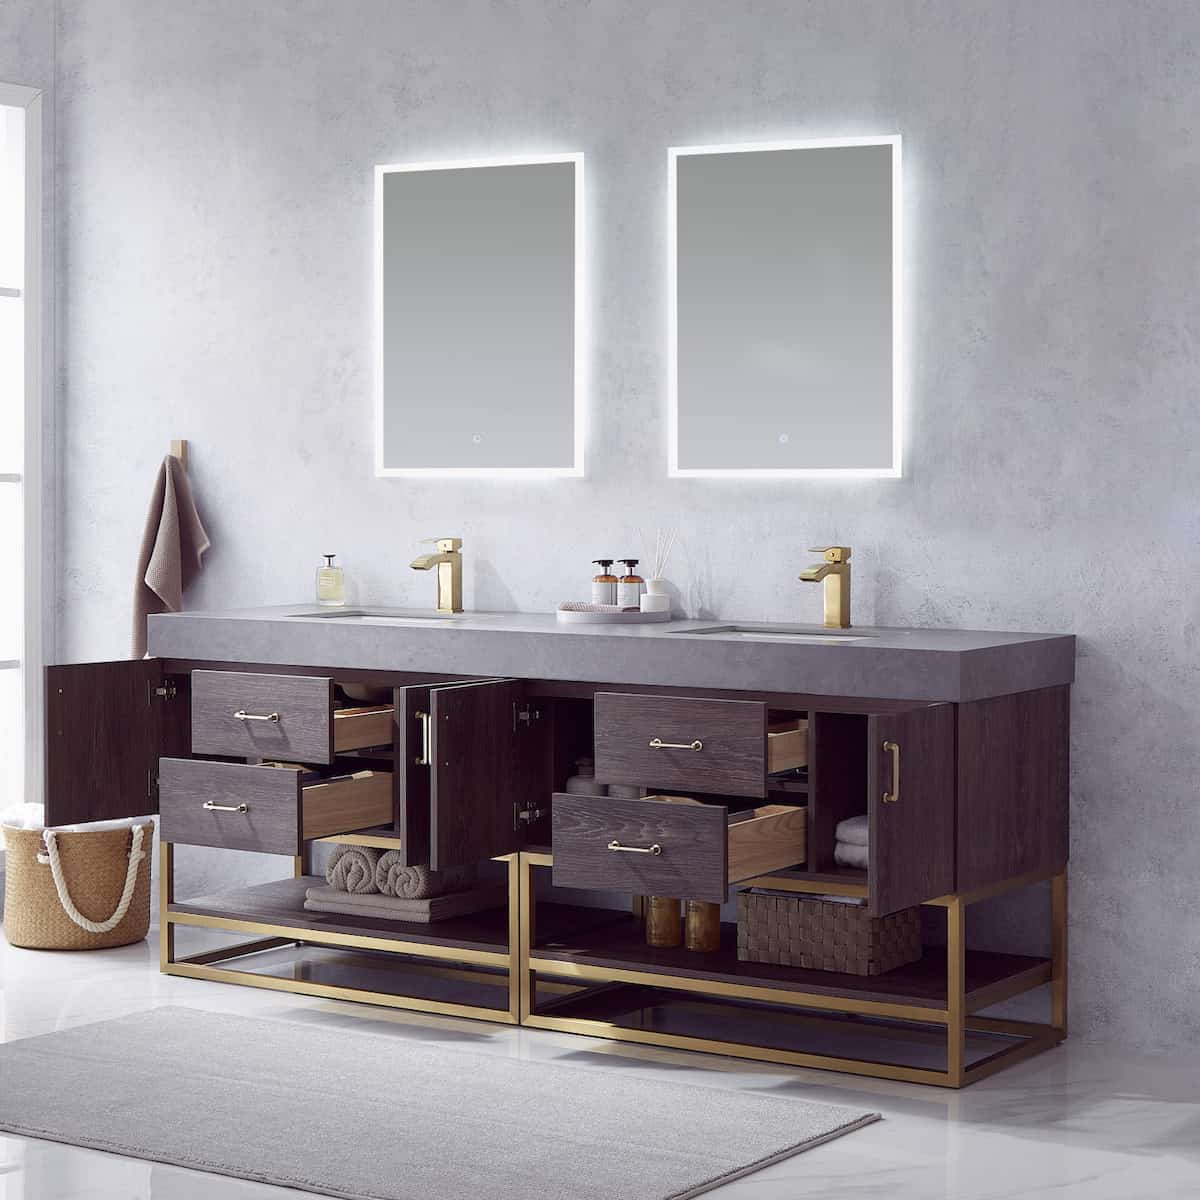 Vinnova Alistair 84 Inch Freestanding Double Sink Bath Vanity in North Carolina Oak and Brushed Gold Frame with Grey Sintered Stone Top With Mirrors Inside 789084-NC-WK